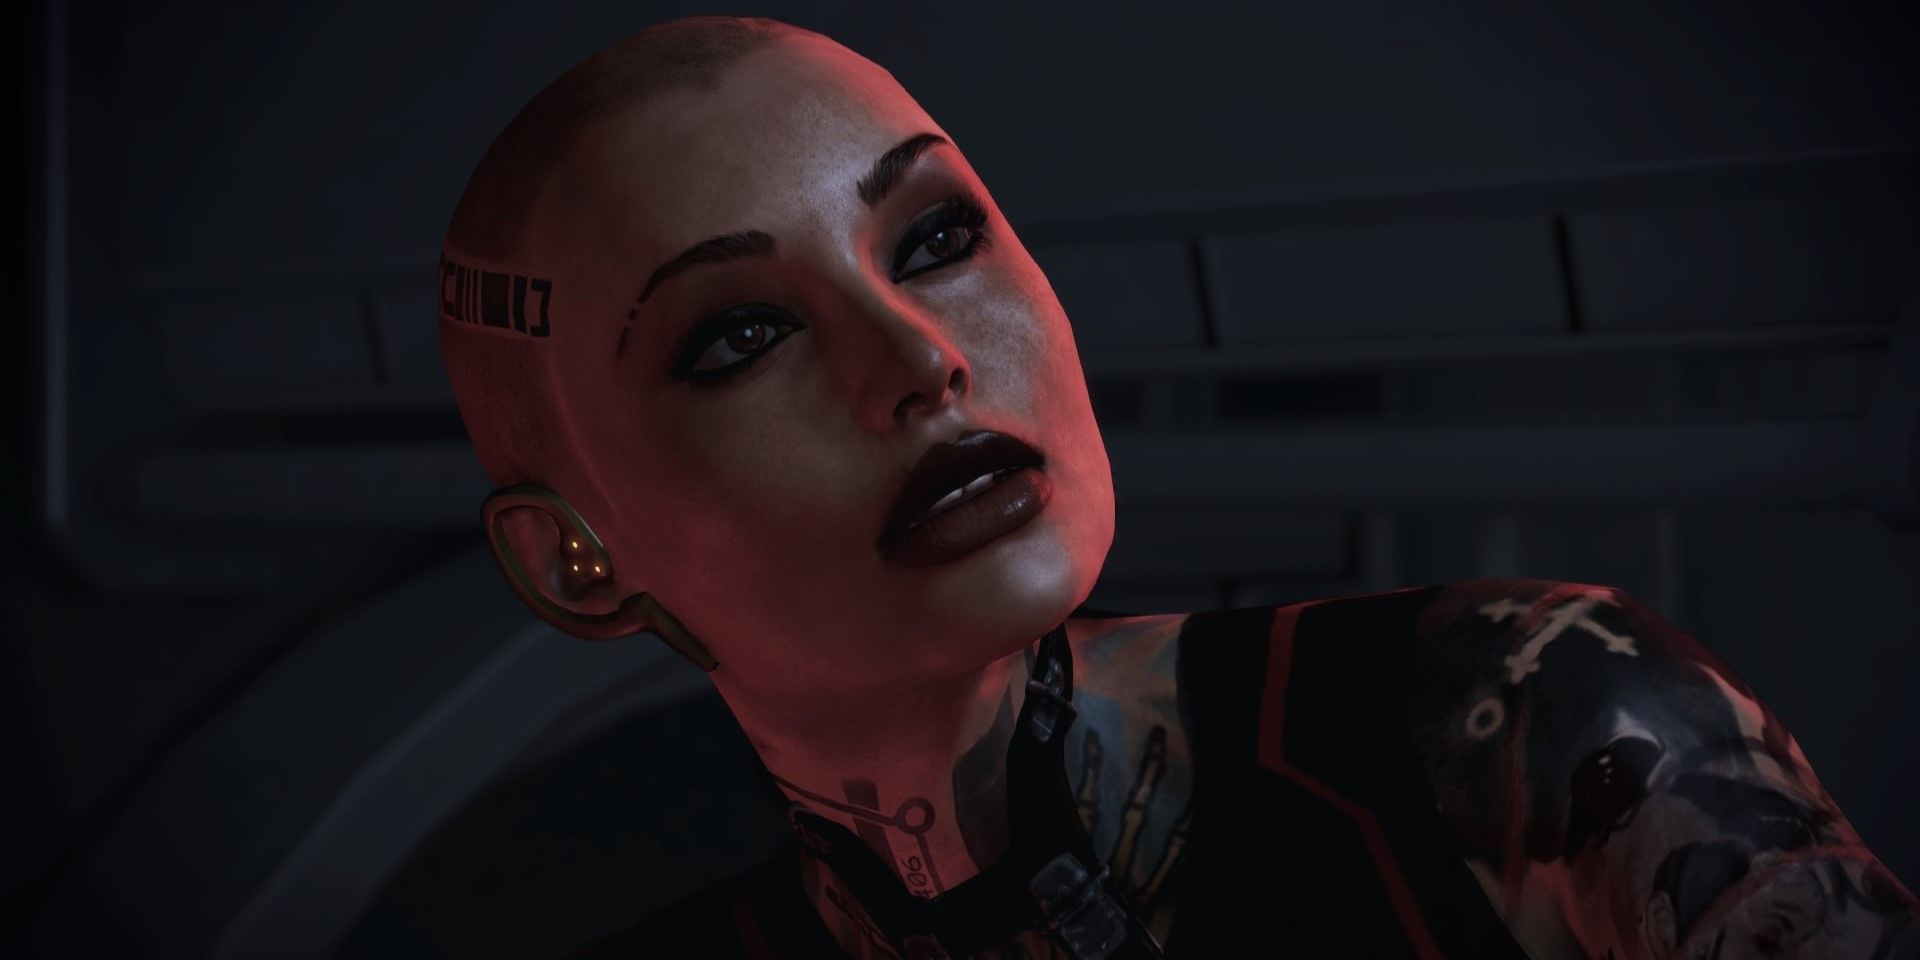 Jack in Mass Effect 2, semi close-up with a neutral expression